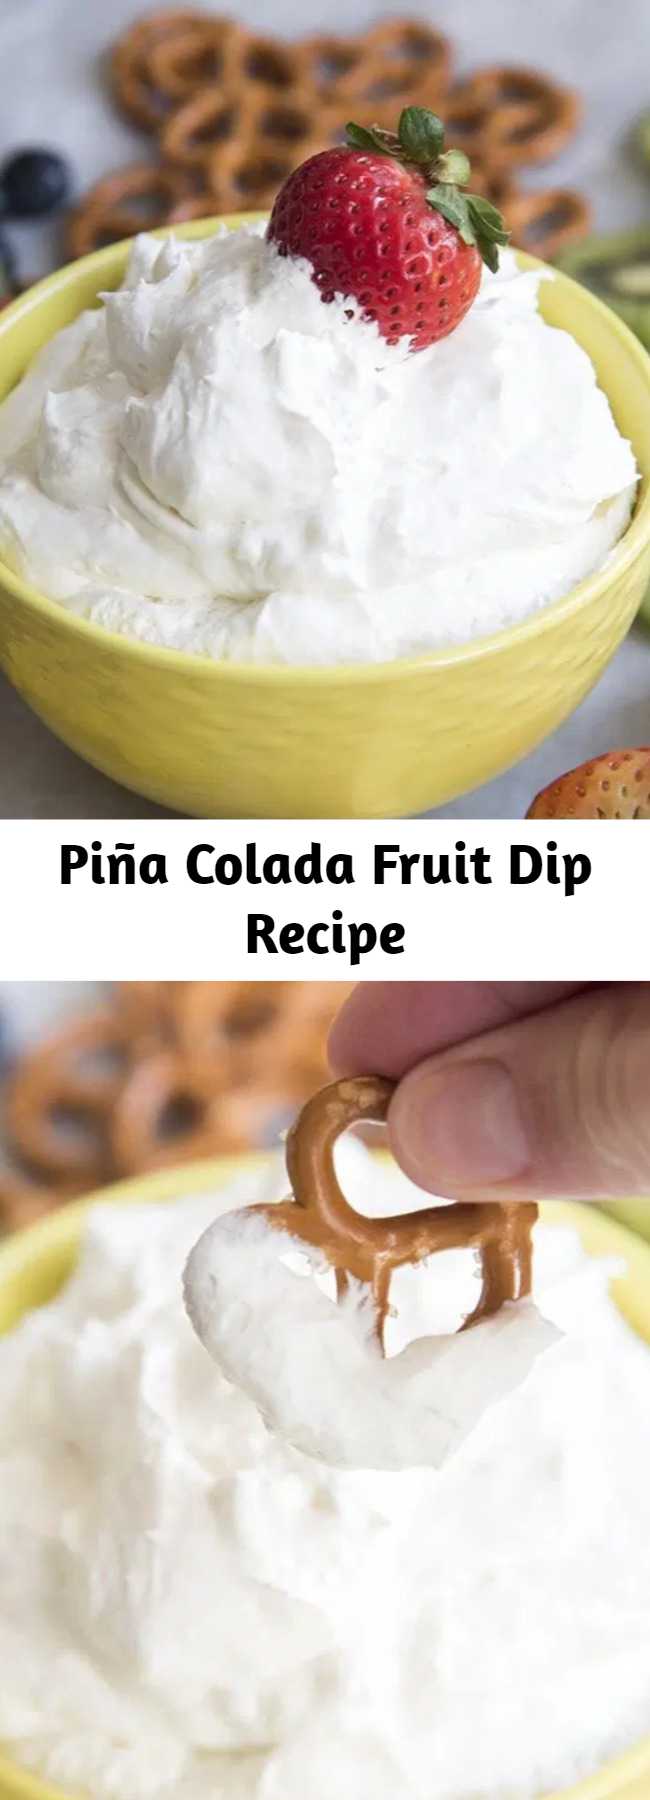 Piña Colada Fruit Dip Recipe - This fruit dip combines those great piña colada flavors of coconut and pineapple, along with cream cheese and cool whip for a perfect fruit dip.